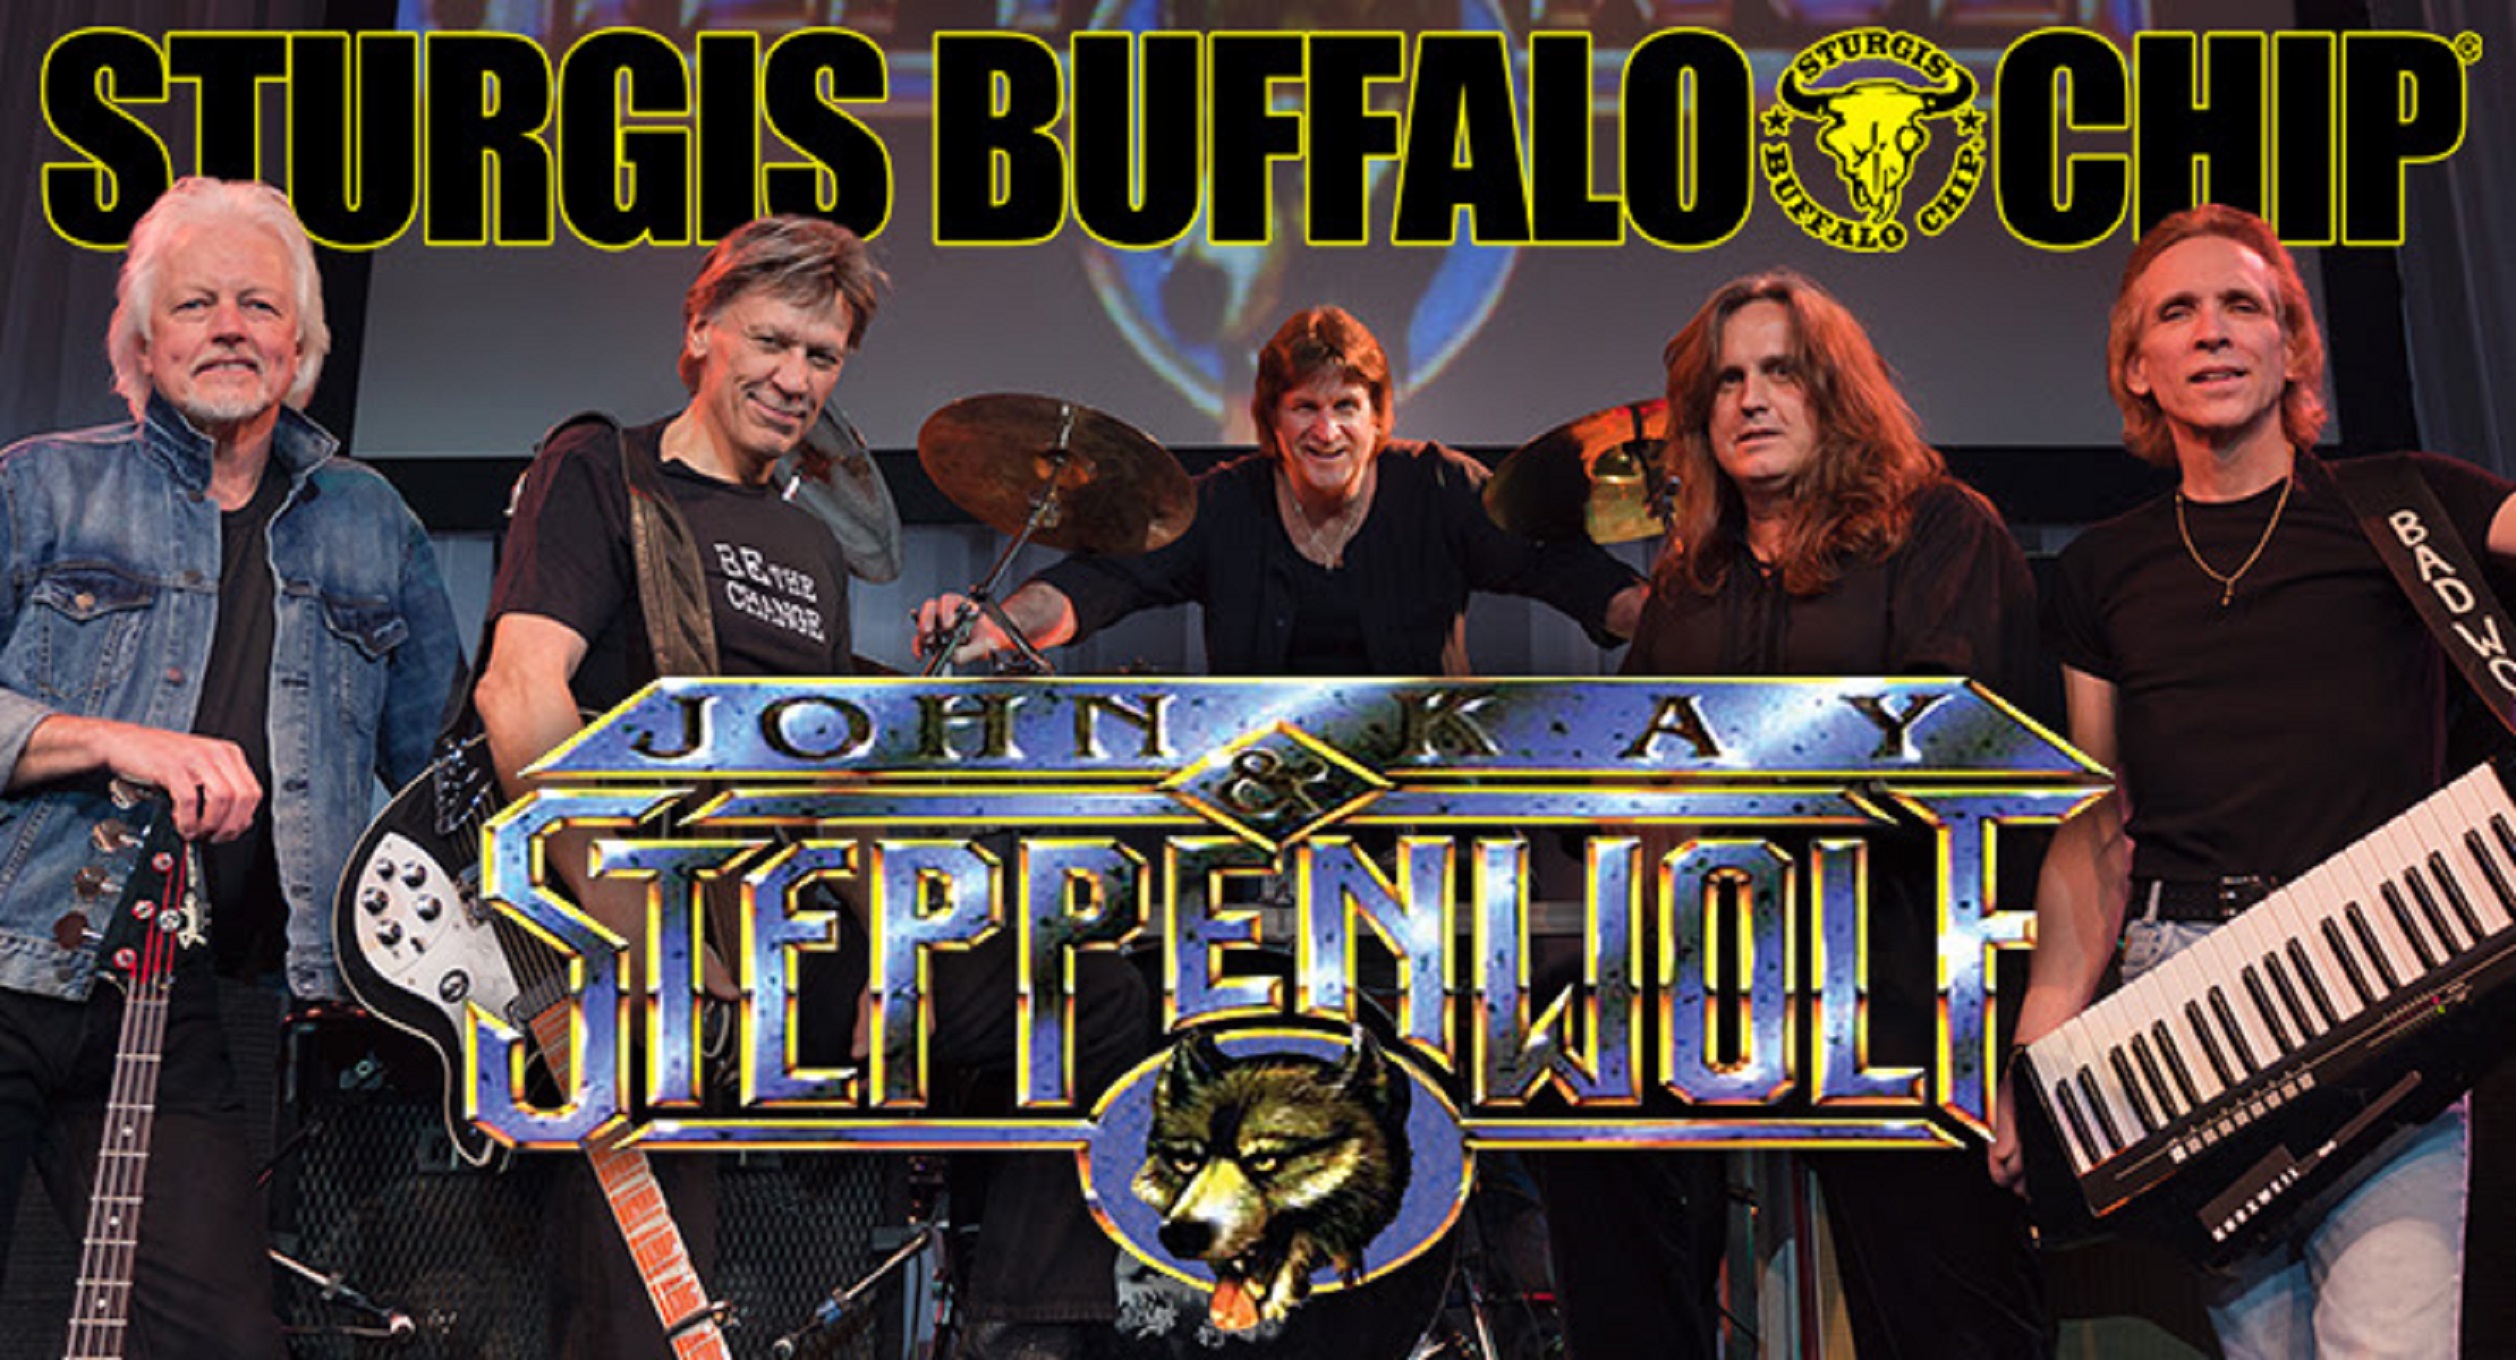 Steppenwolf Bring Thunder to the Sturgis Buffalo Chip